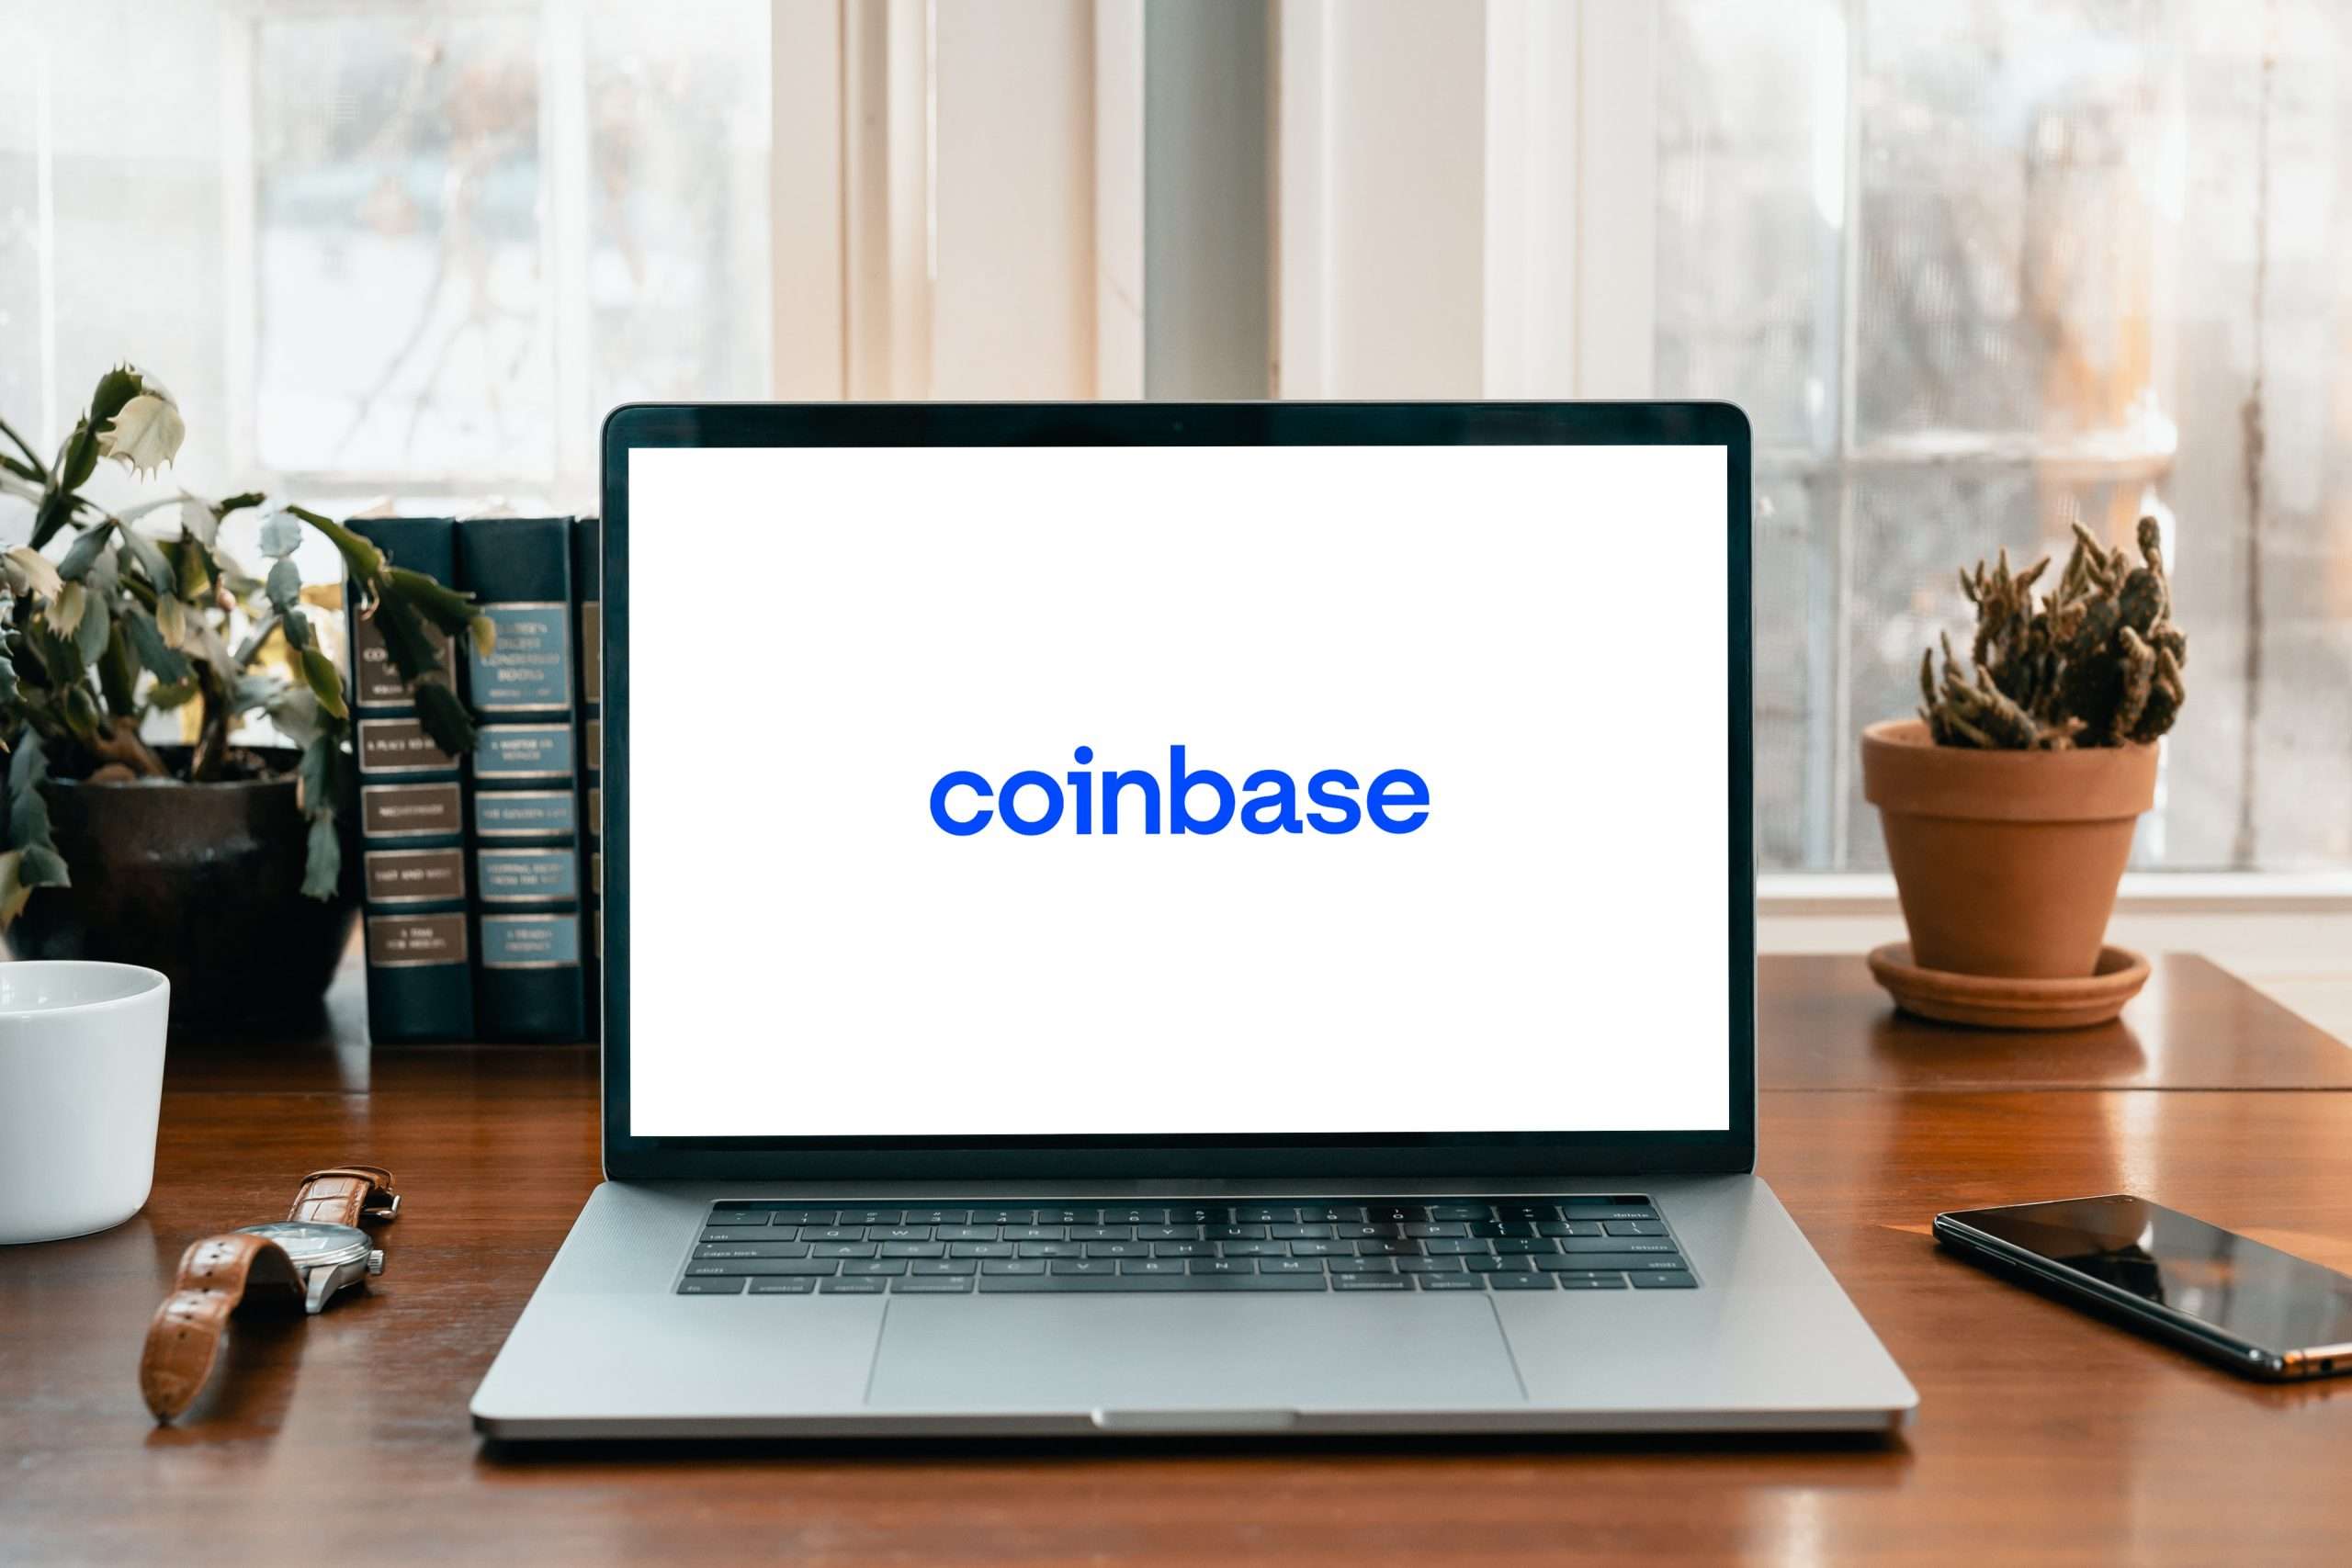 Coinbase Working on ‘flatcoins’ that will be Tethered to Inflation